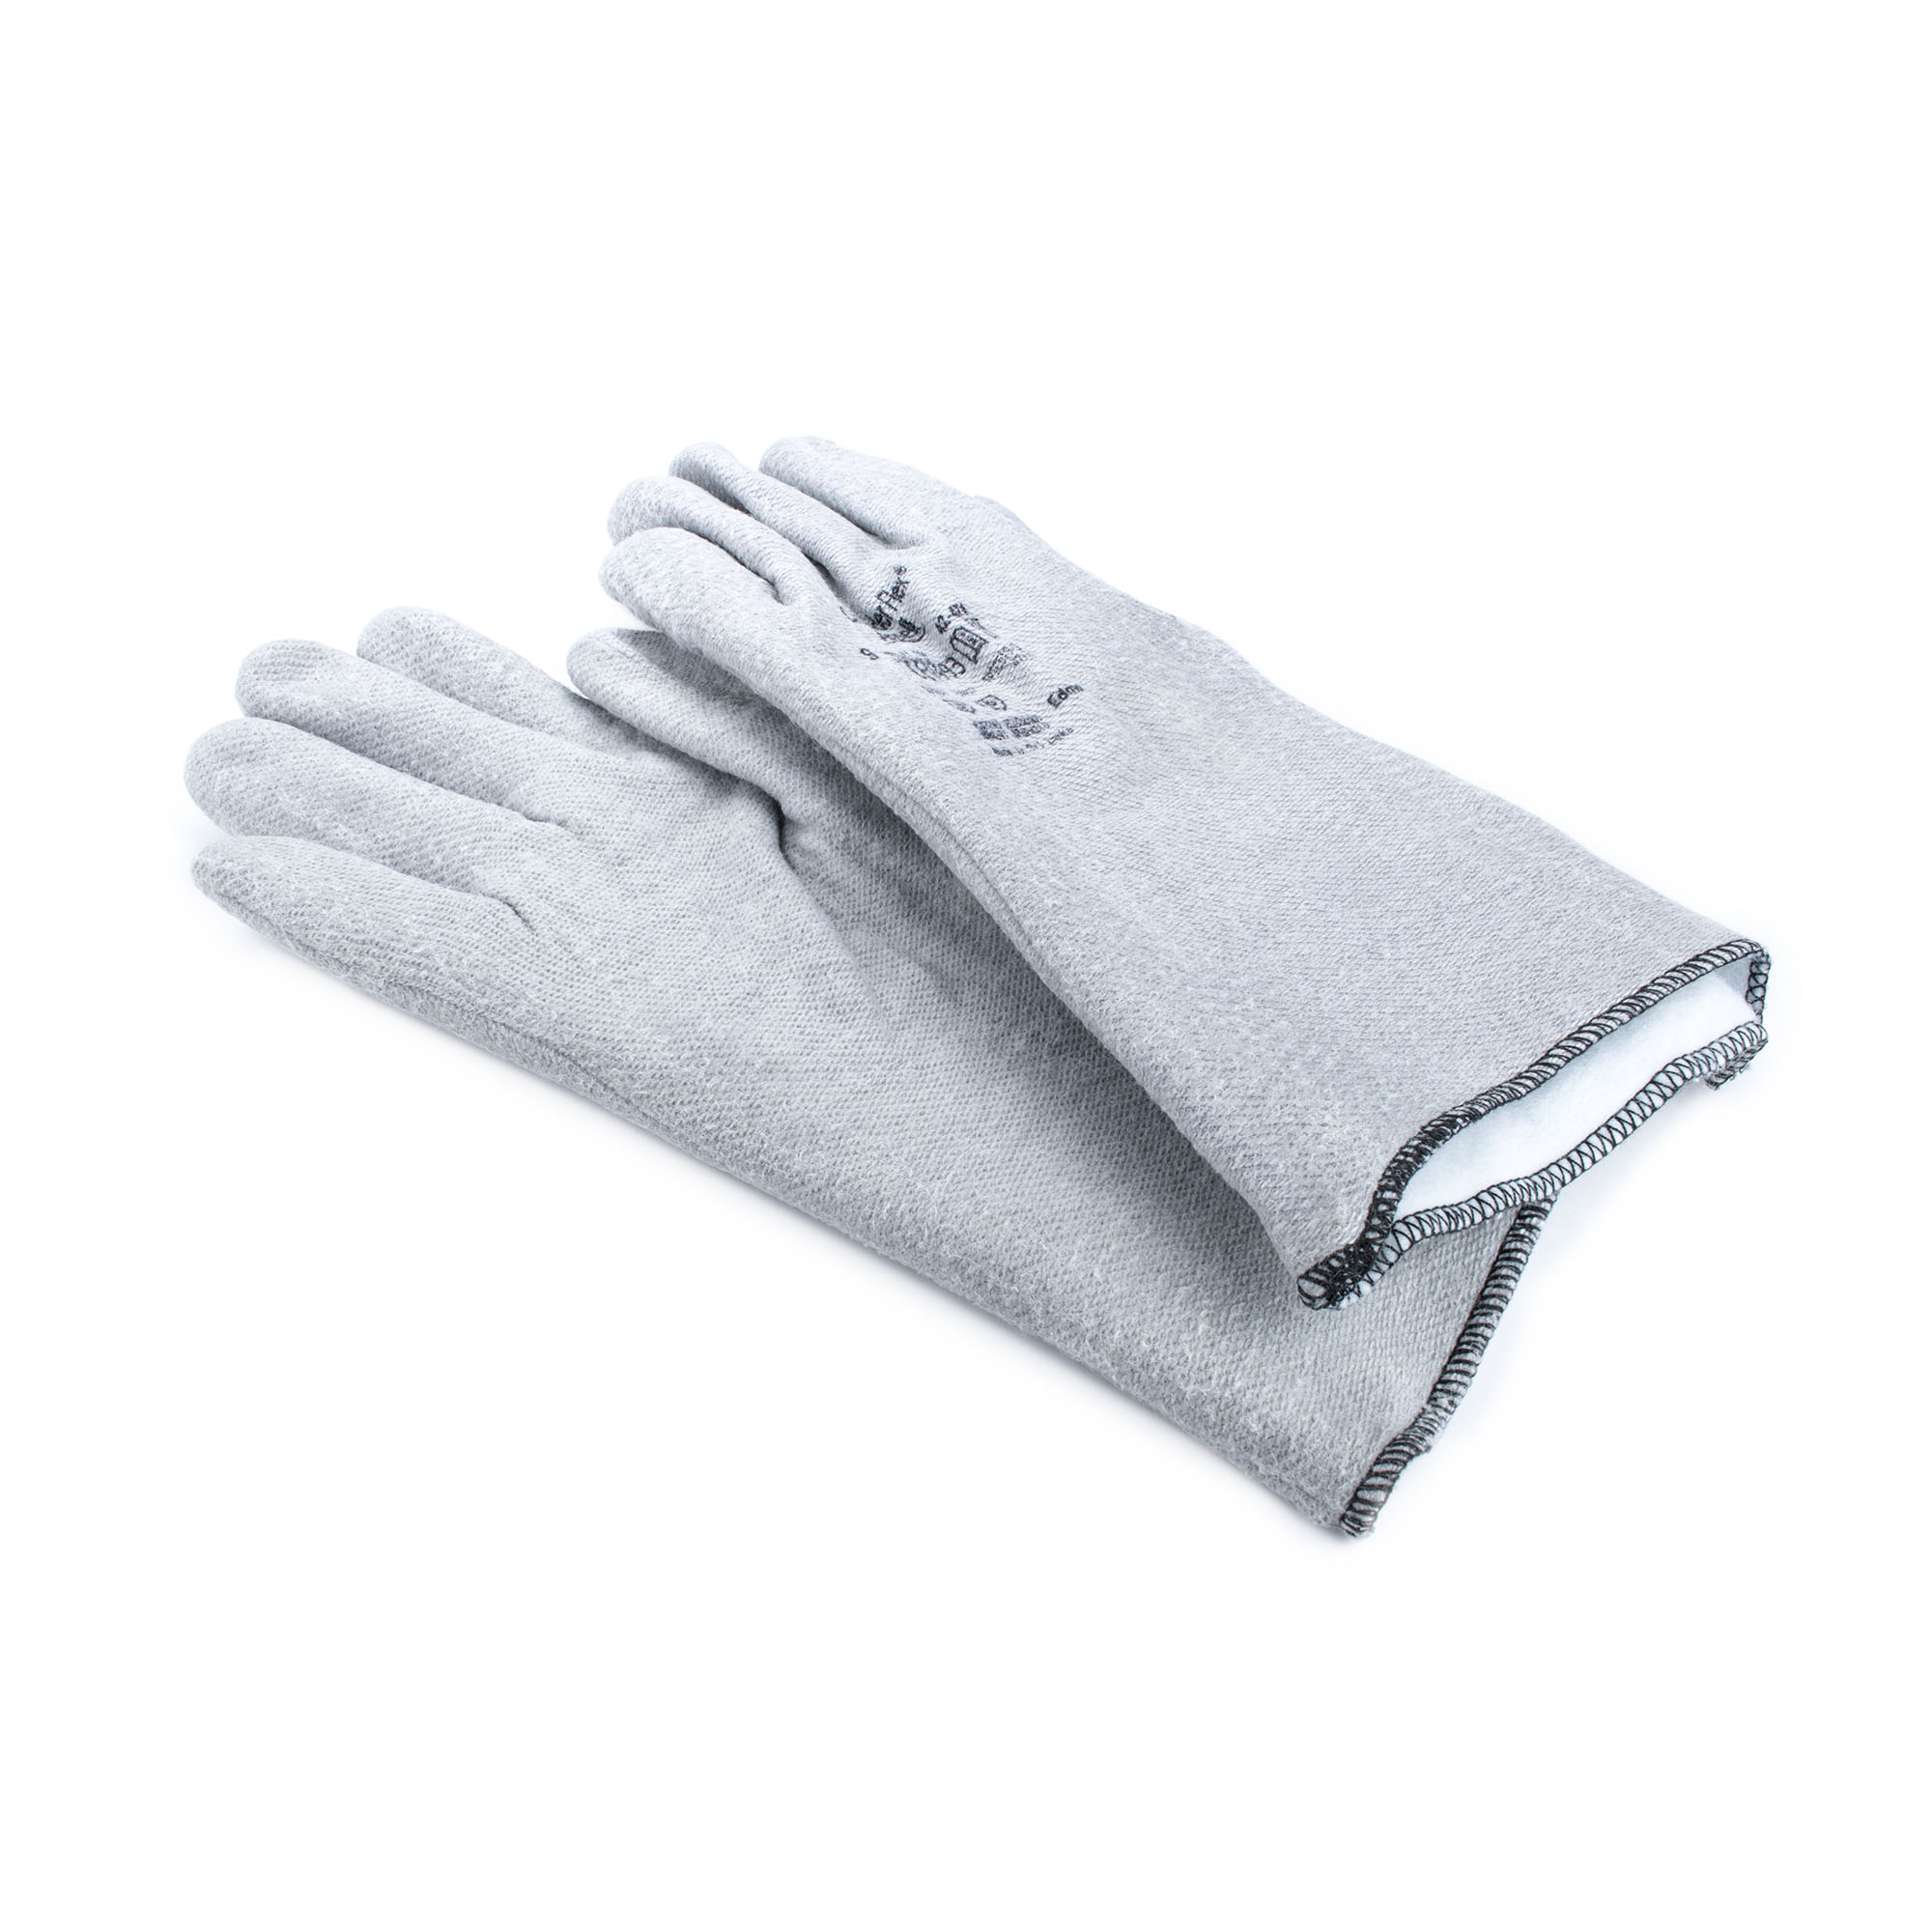 Heat Protective Gloves Image